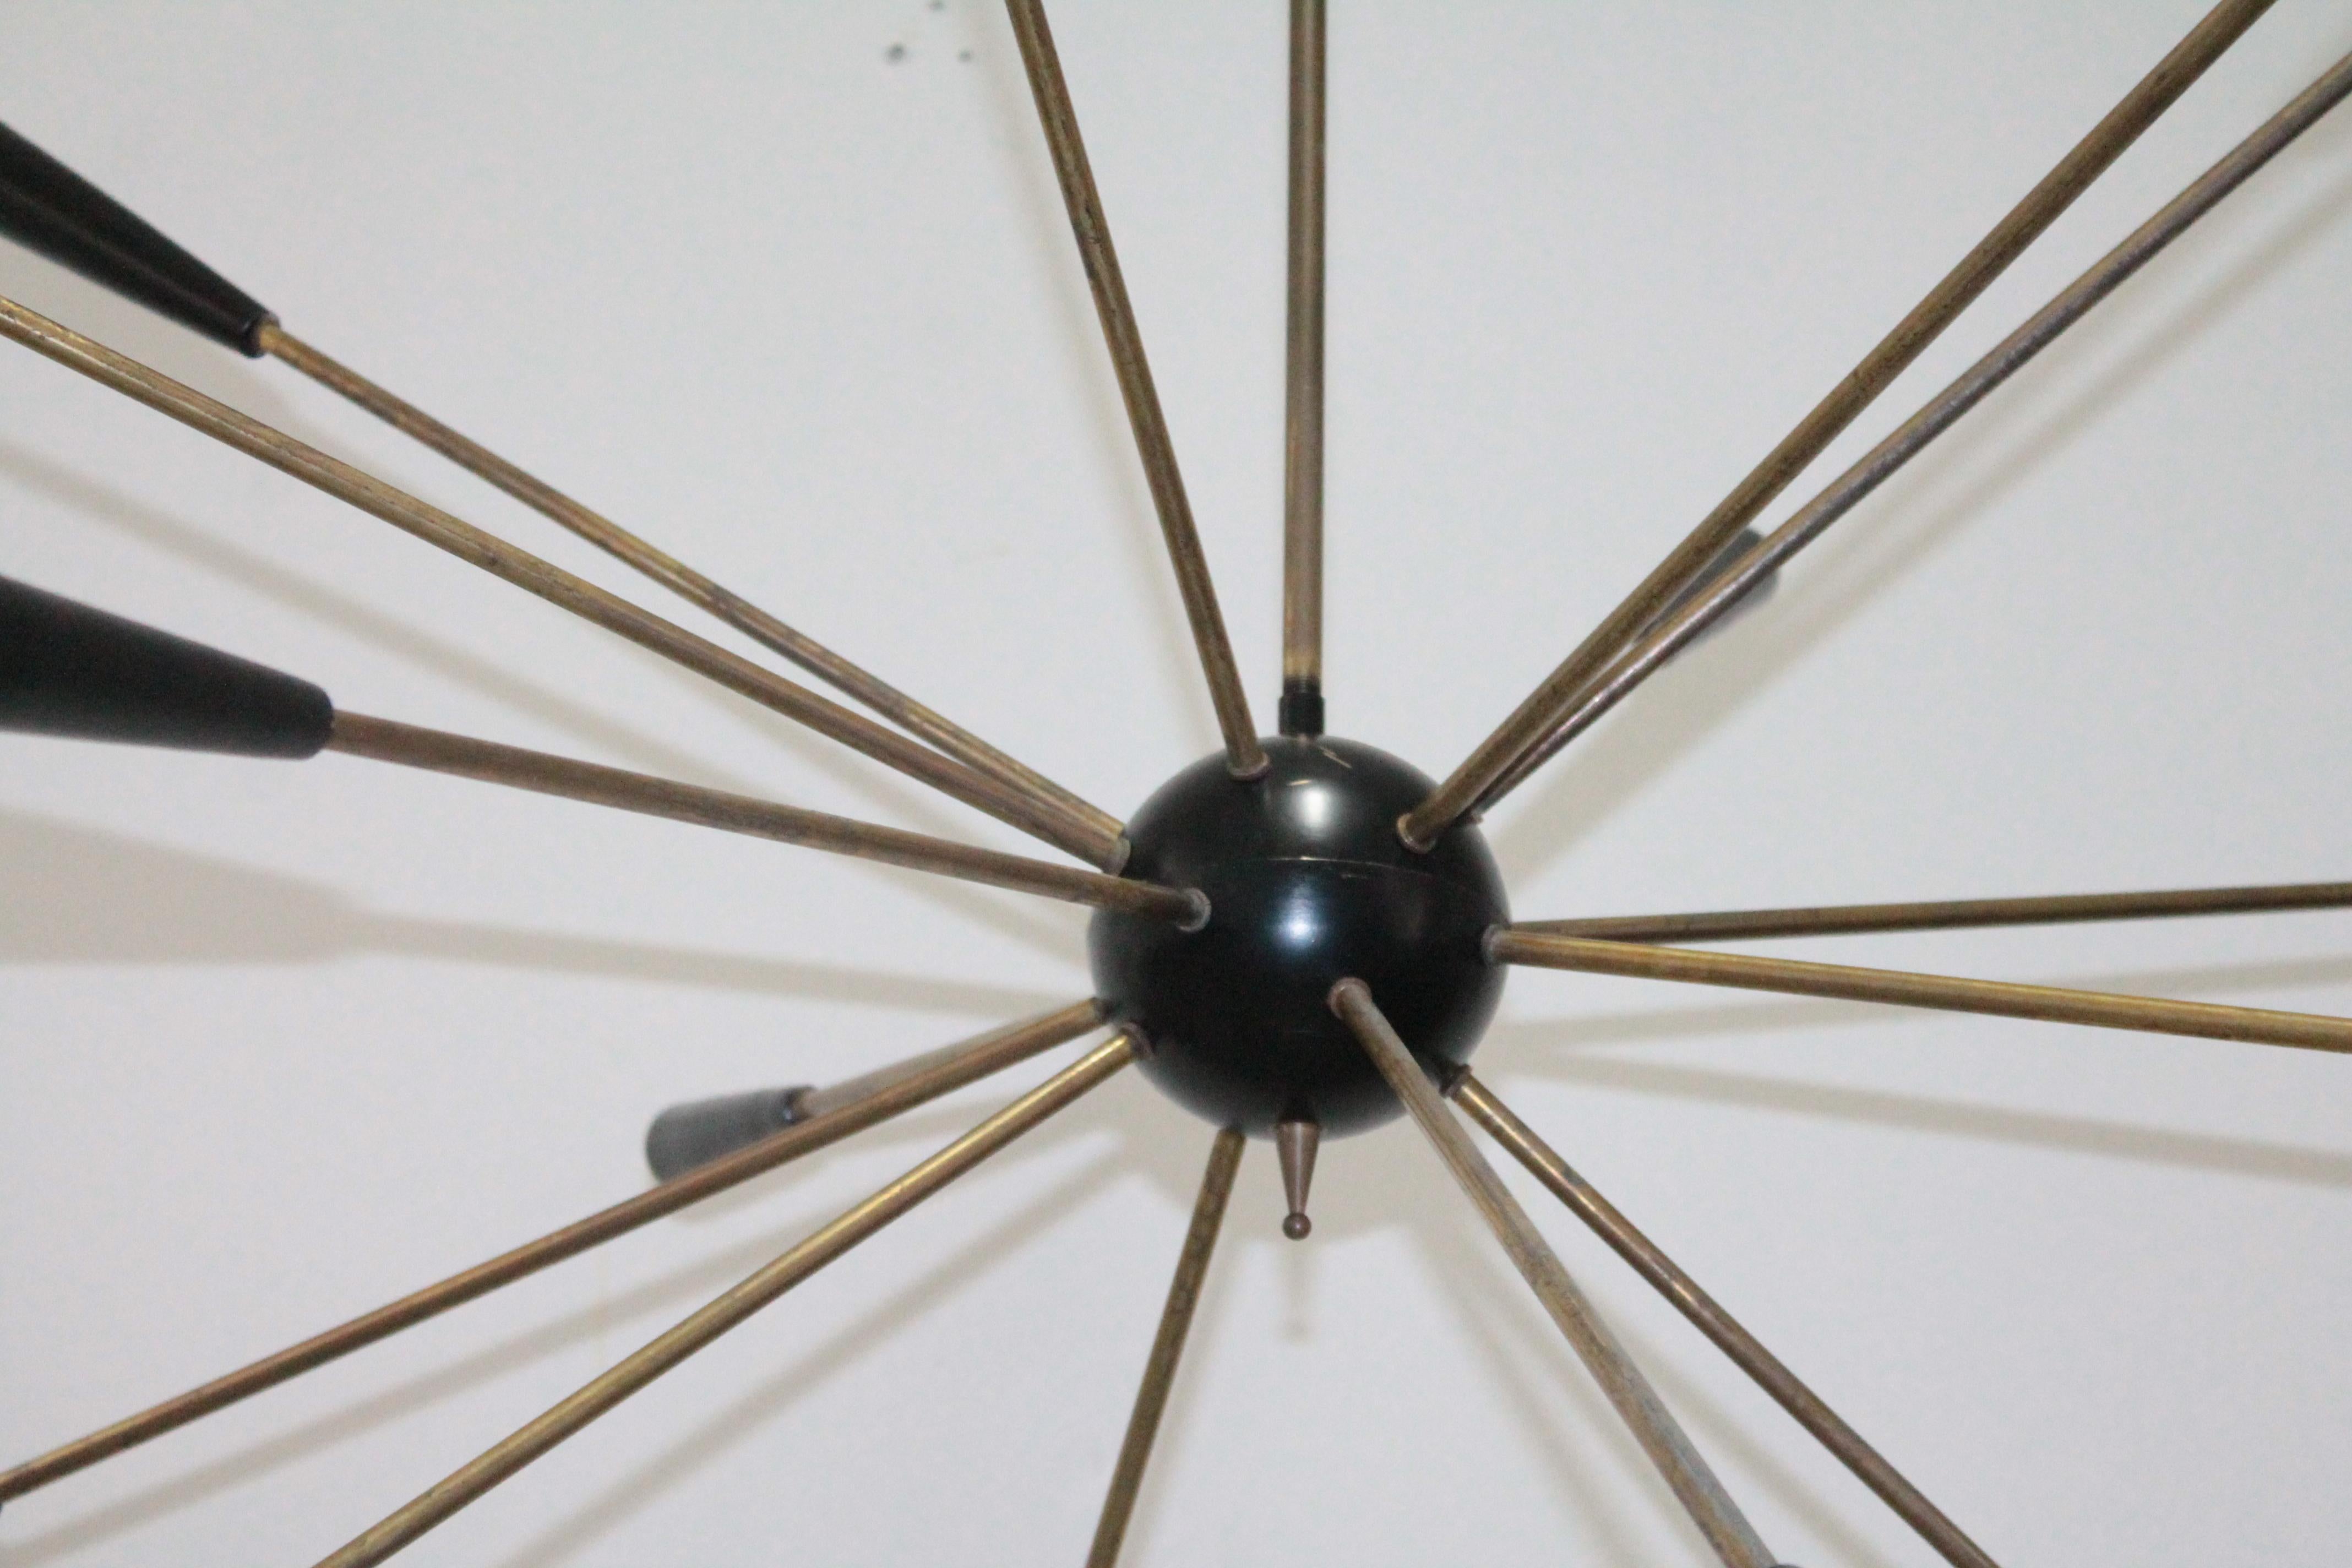 Sputnik Ceiling lamp 1950s Italian manufacturing in the style of Stilnovo.
Original vintage condition, signs of use and scratches.
Working condition, socket type ed14 max 40w for bulb.